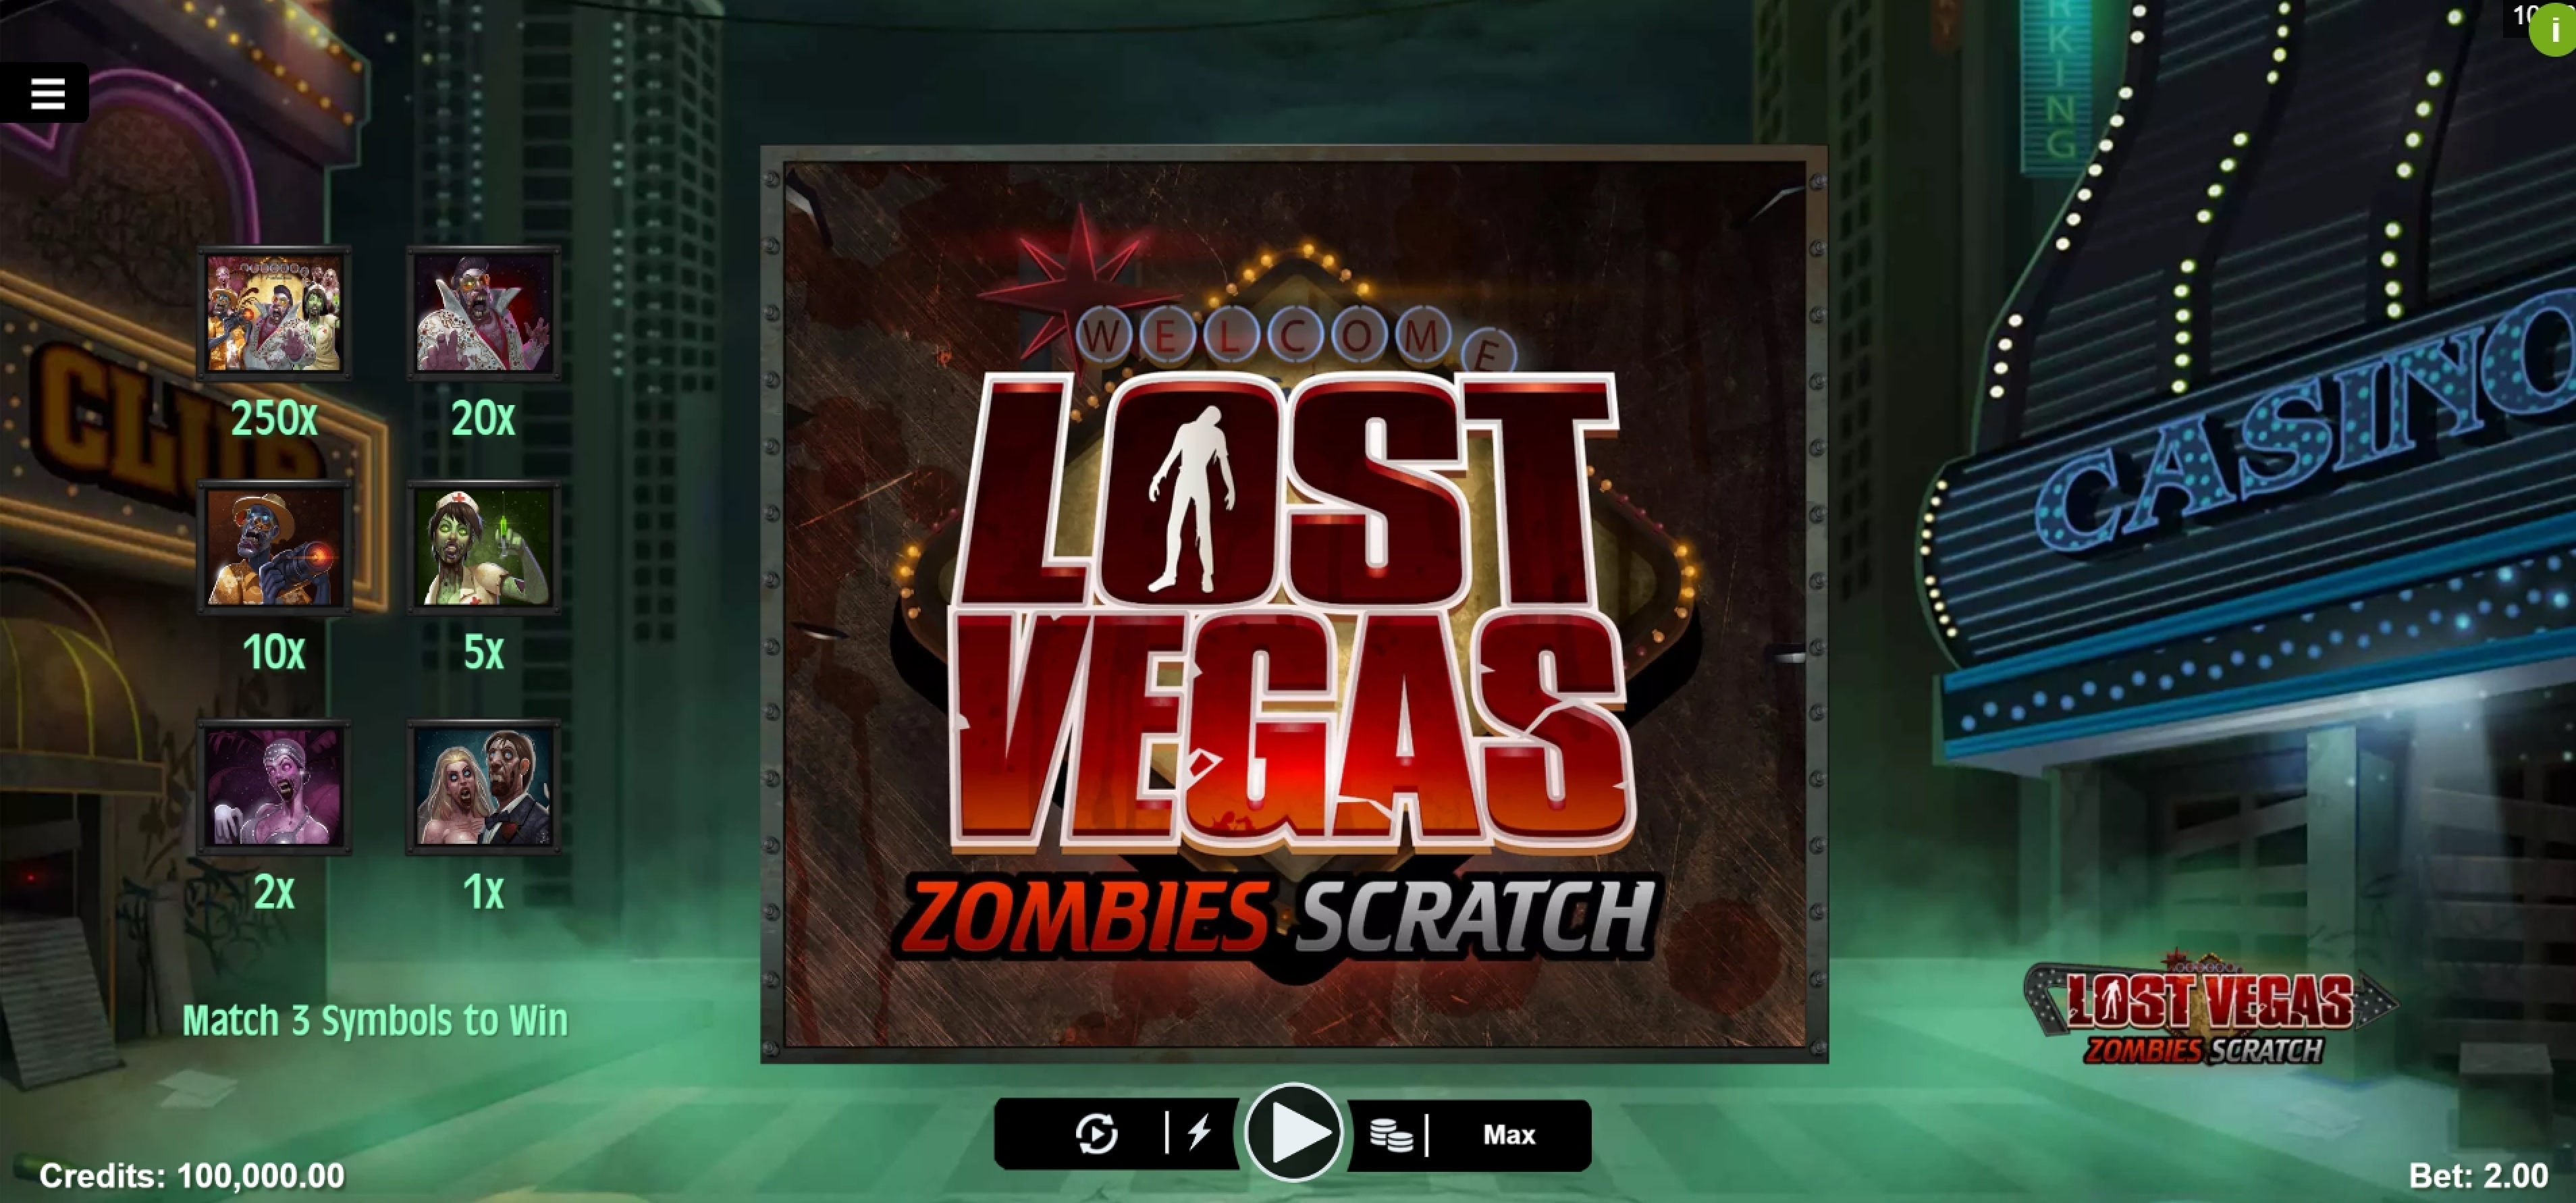 Play Lost Vegas Zombie Scratch Free Casino Slot Game by Microgaming